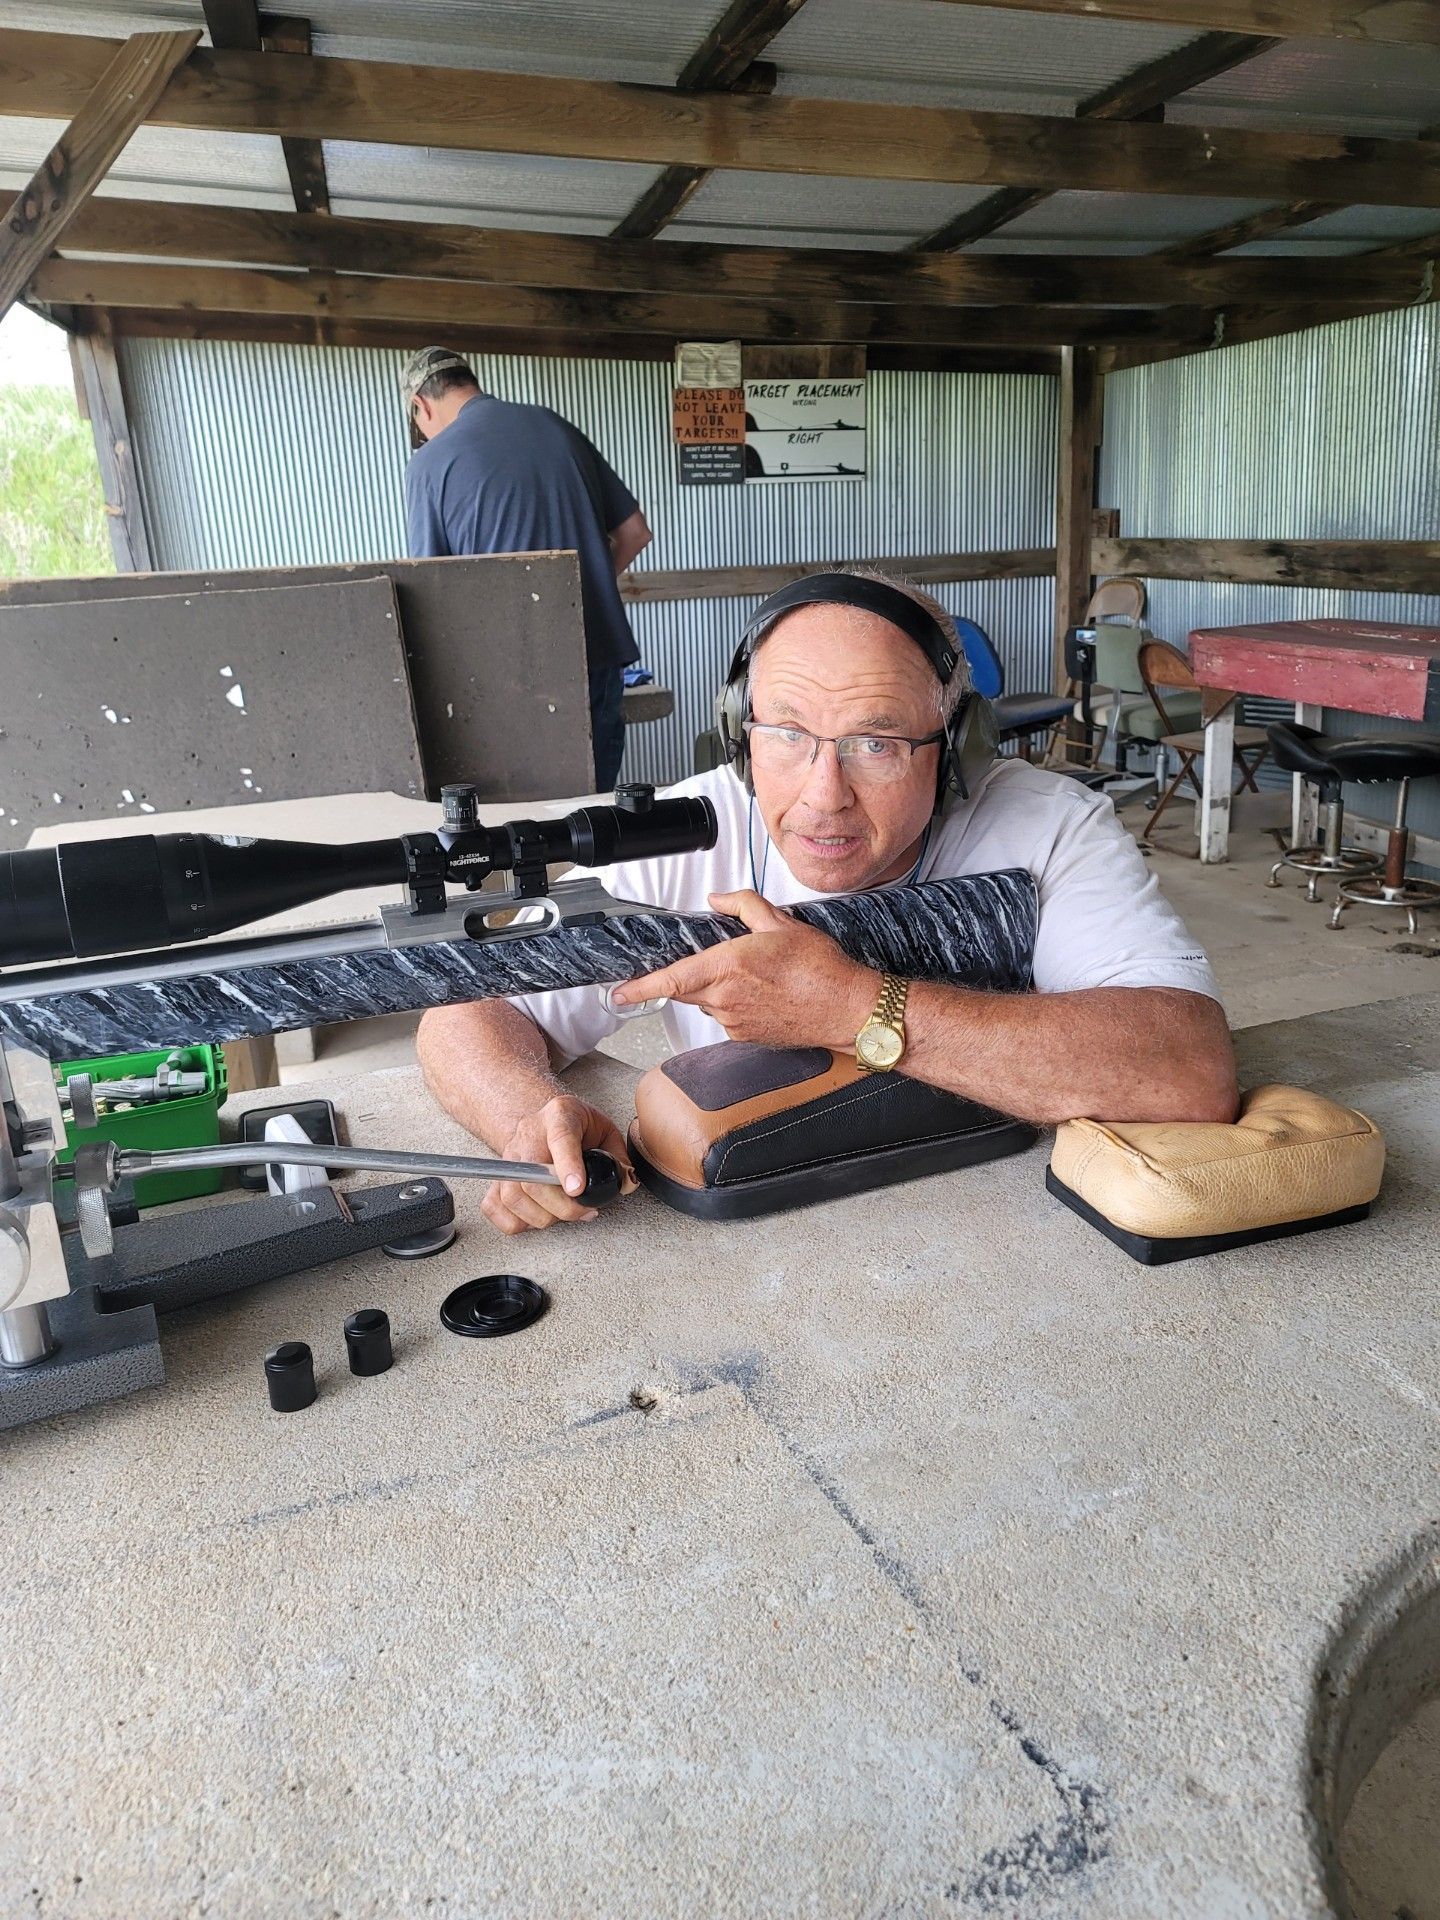 a man wearing glasses and white shirt holding a rifle at gun range table